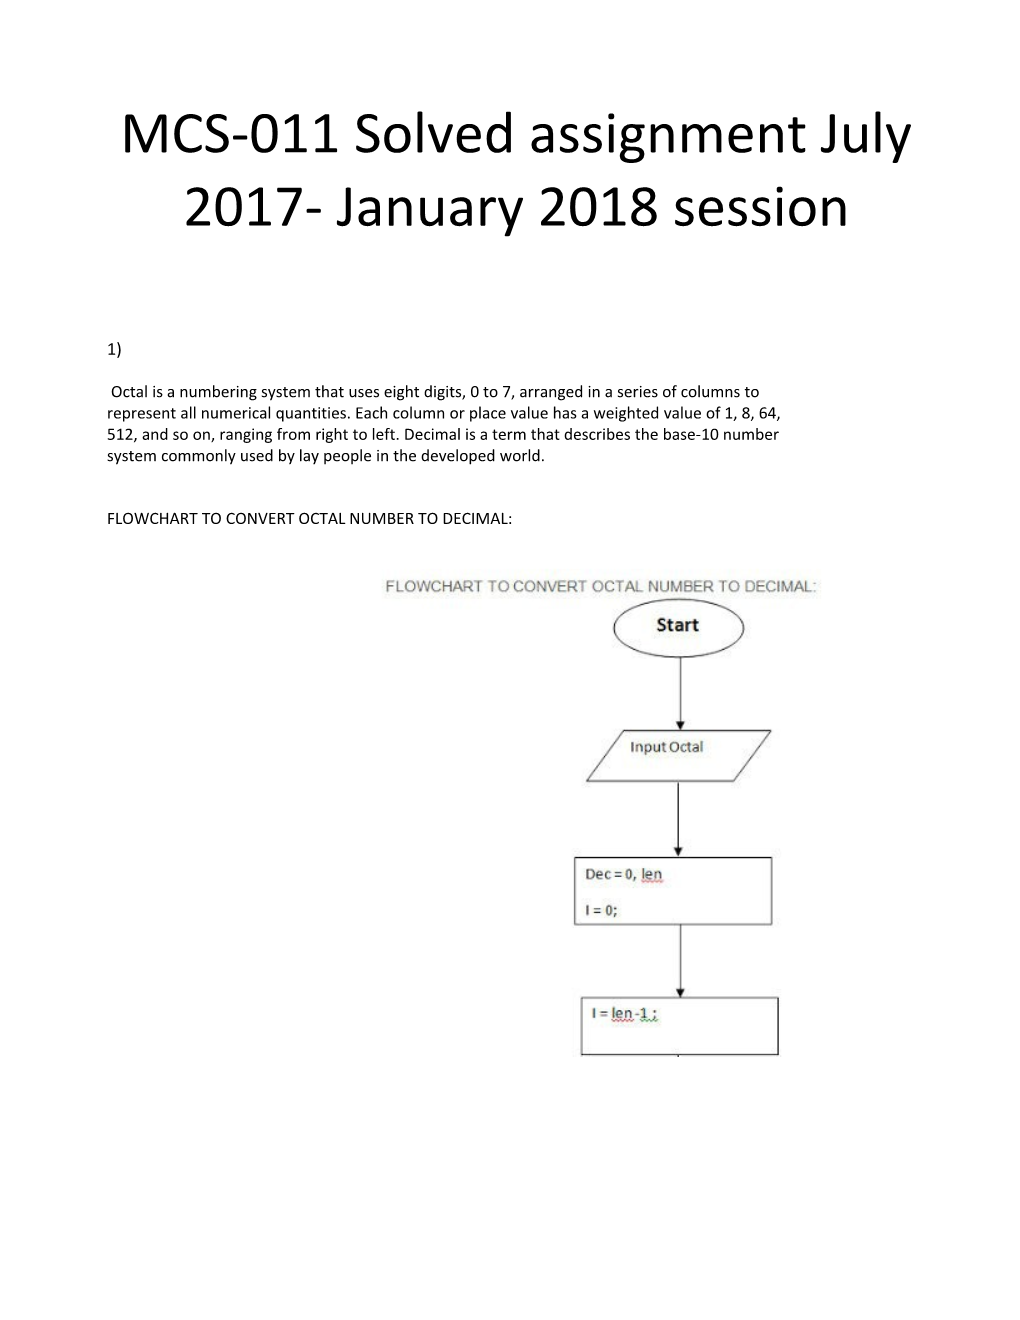 MCS-011 Solved Assignment July 2017- January 2018 Session